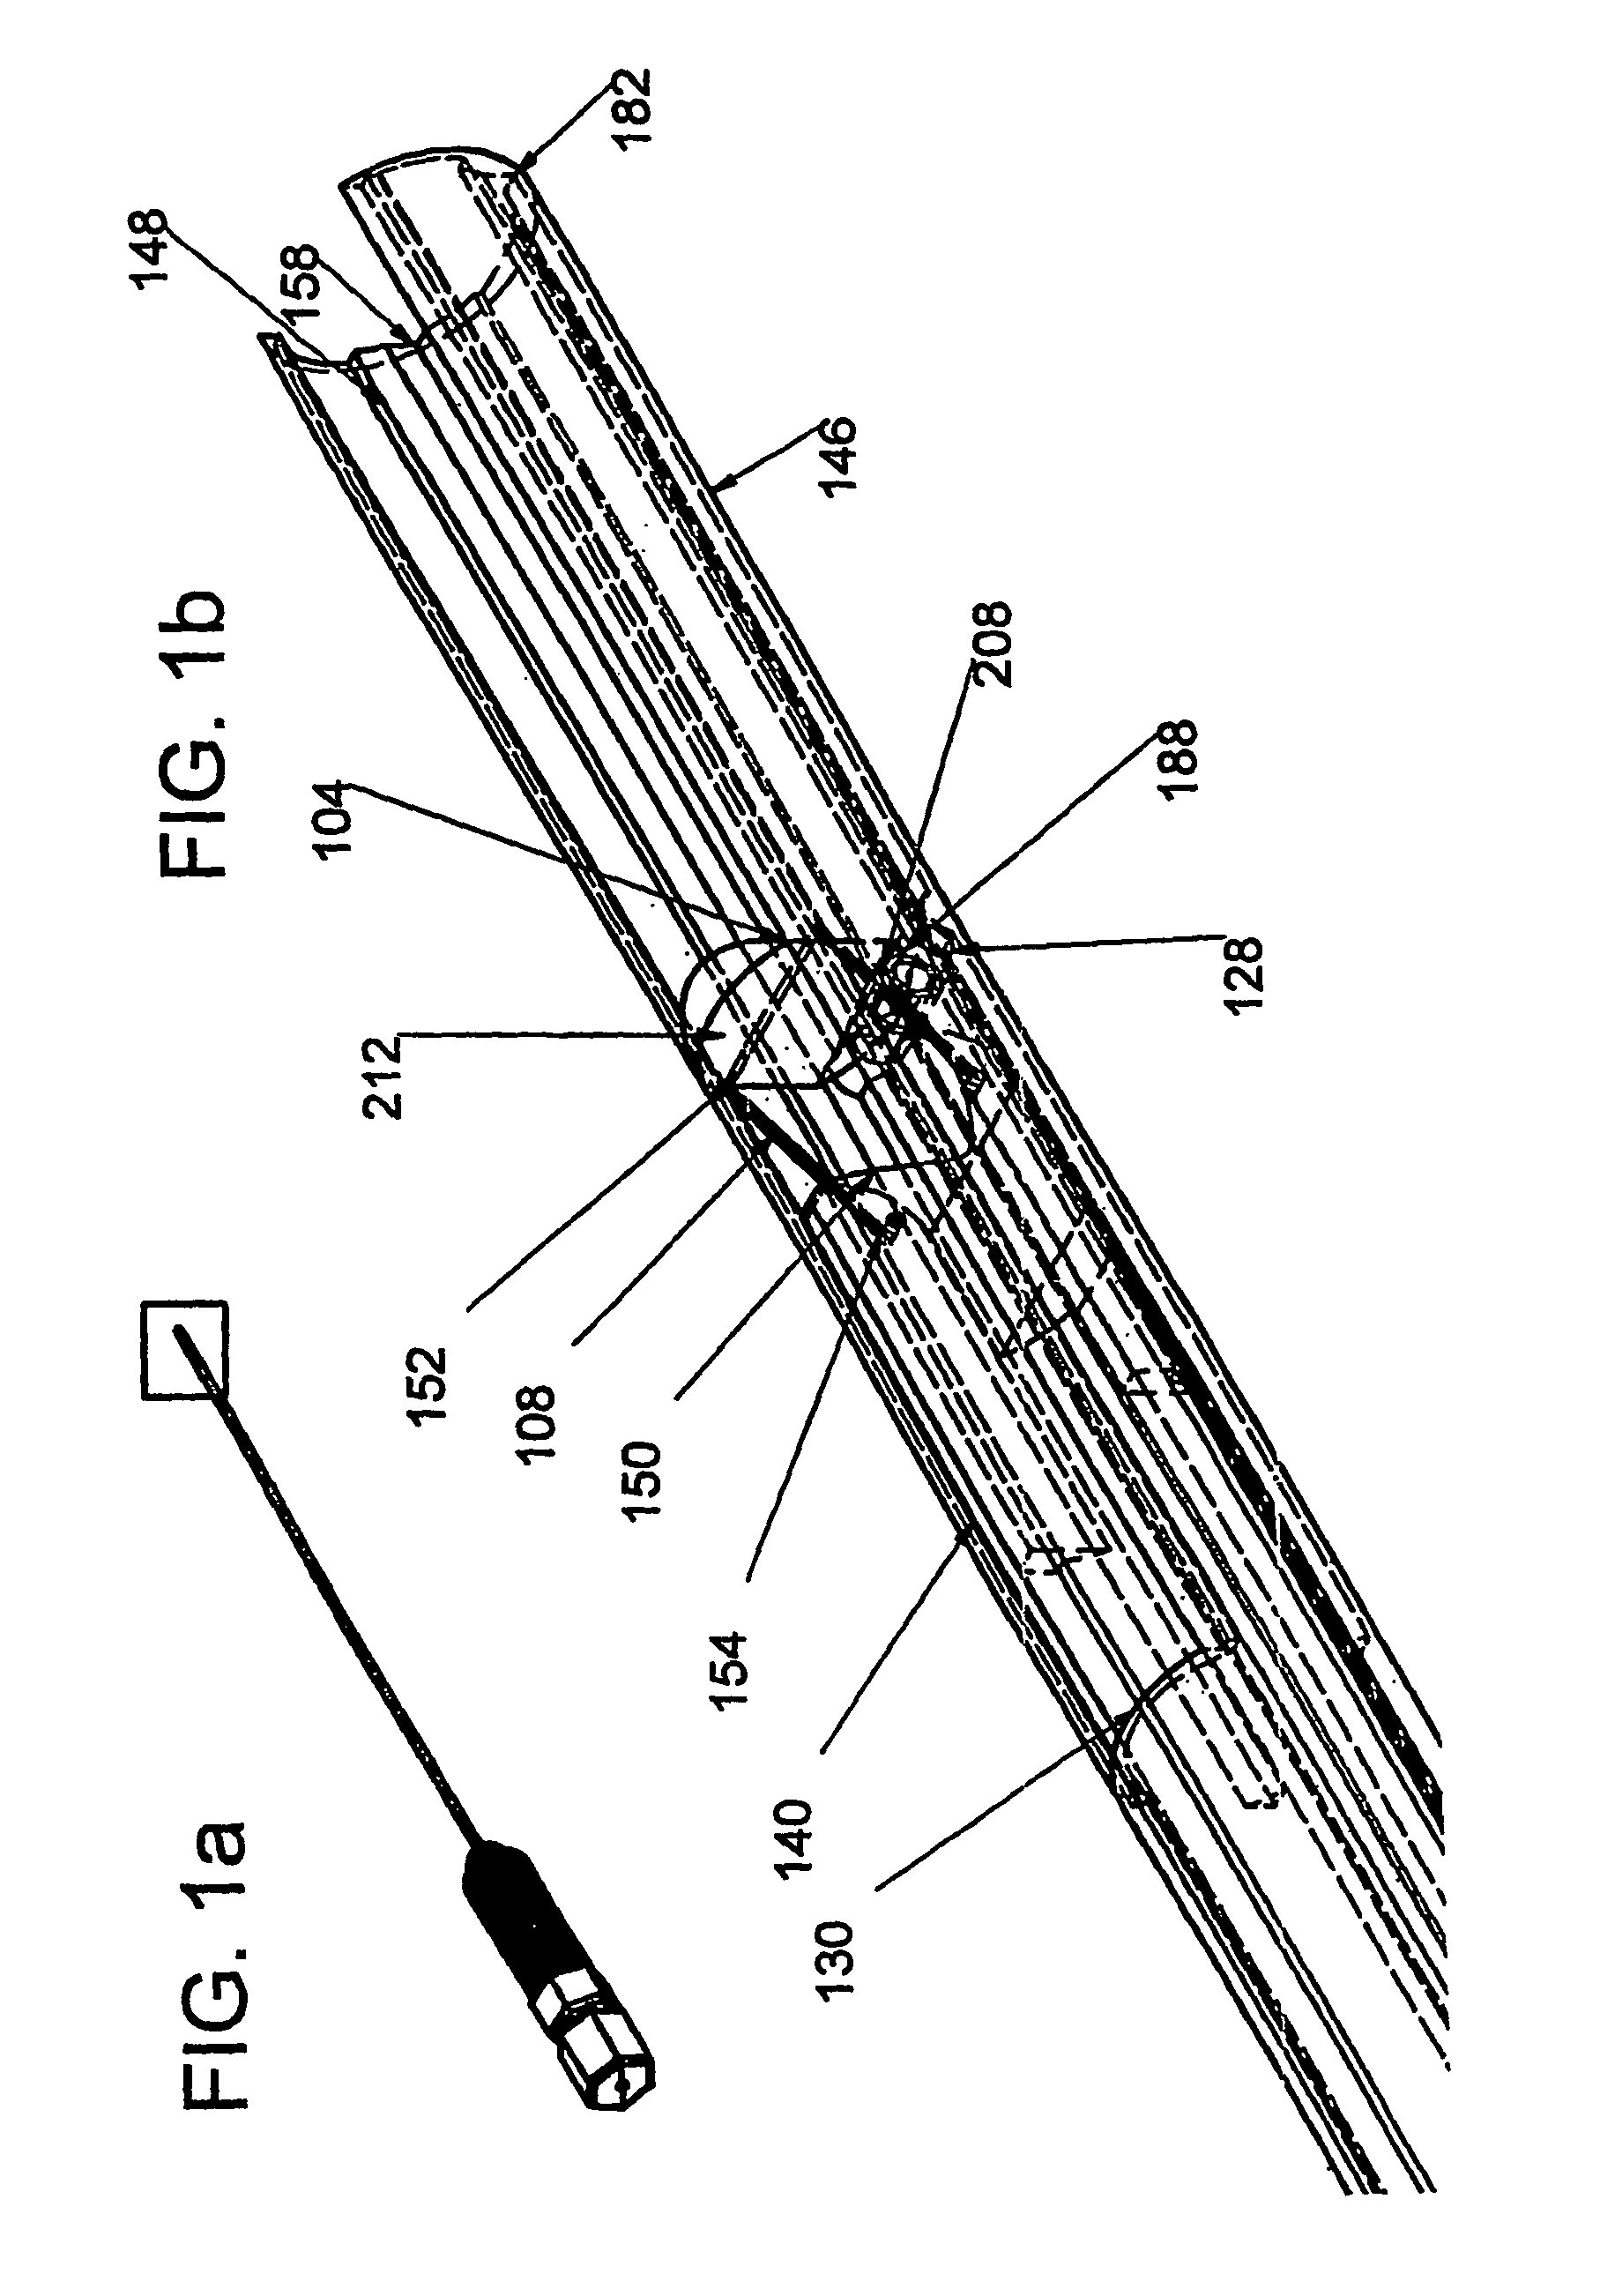 Adjustable device delivery system